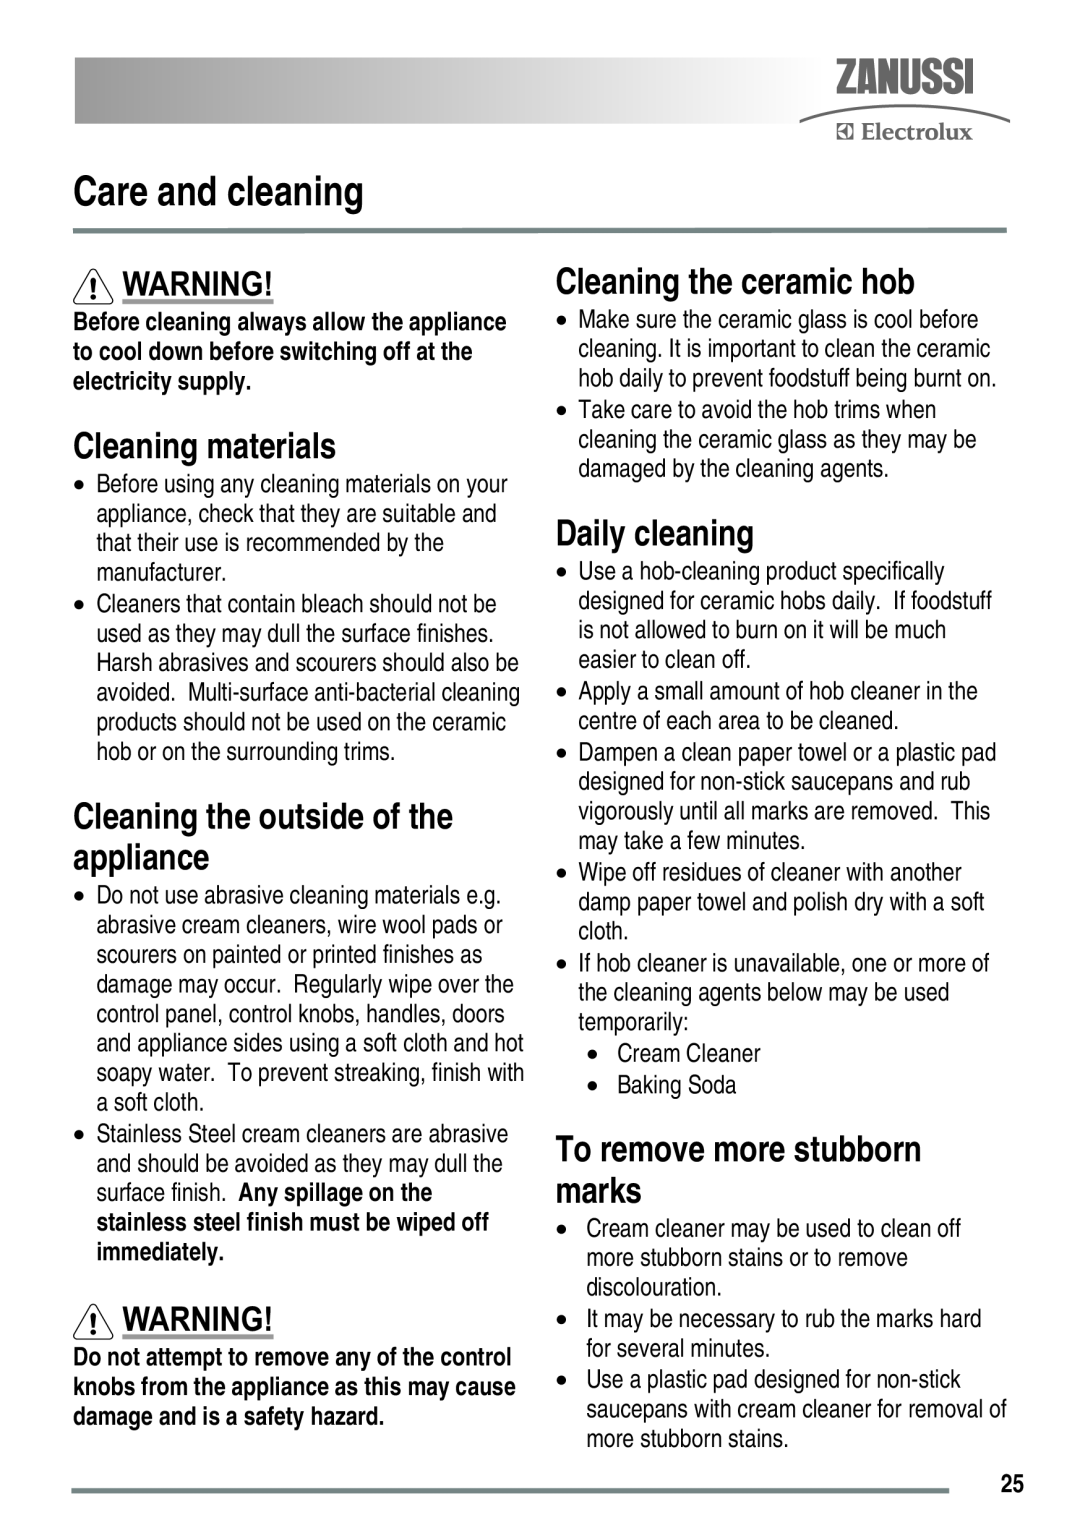 Zanussi ZKC5030 Care and cleaning, Cleaning materials, Cleaning the outside of the appliance, Cleaning the ceramic hob 